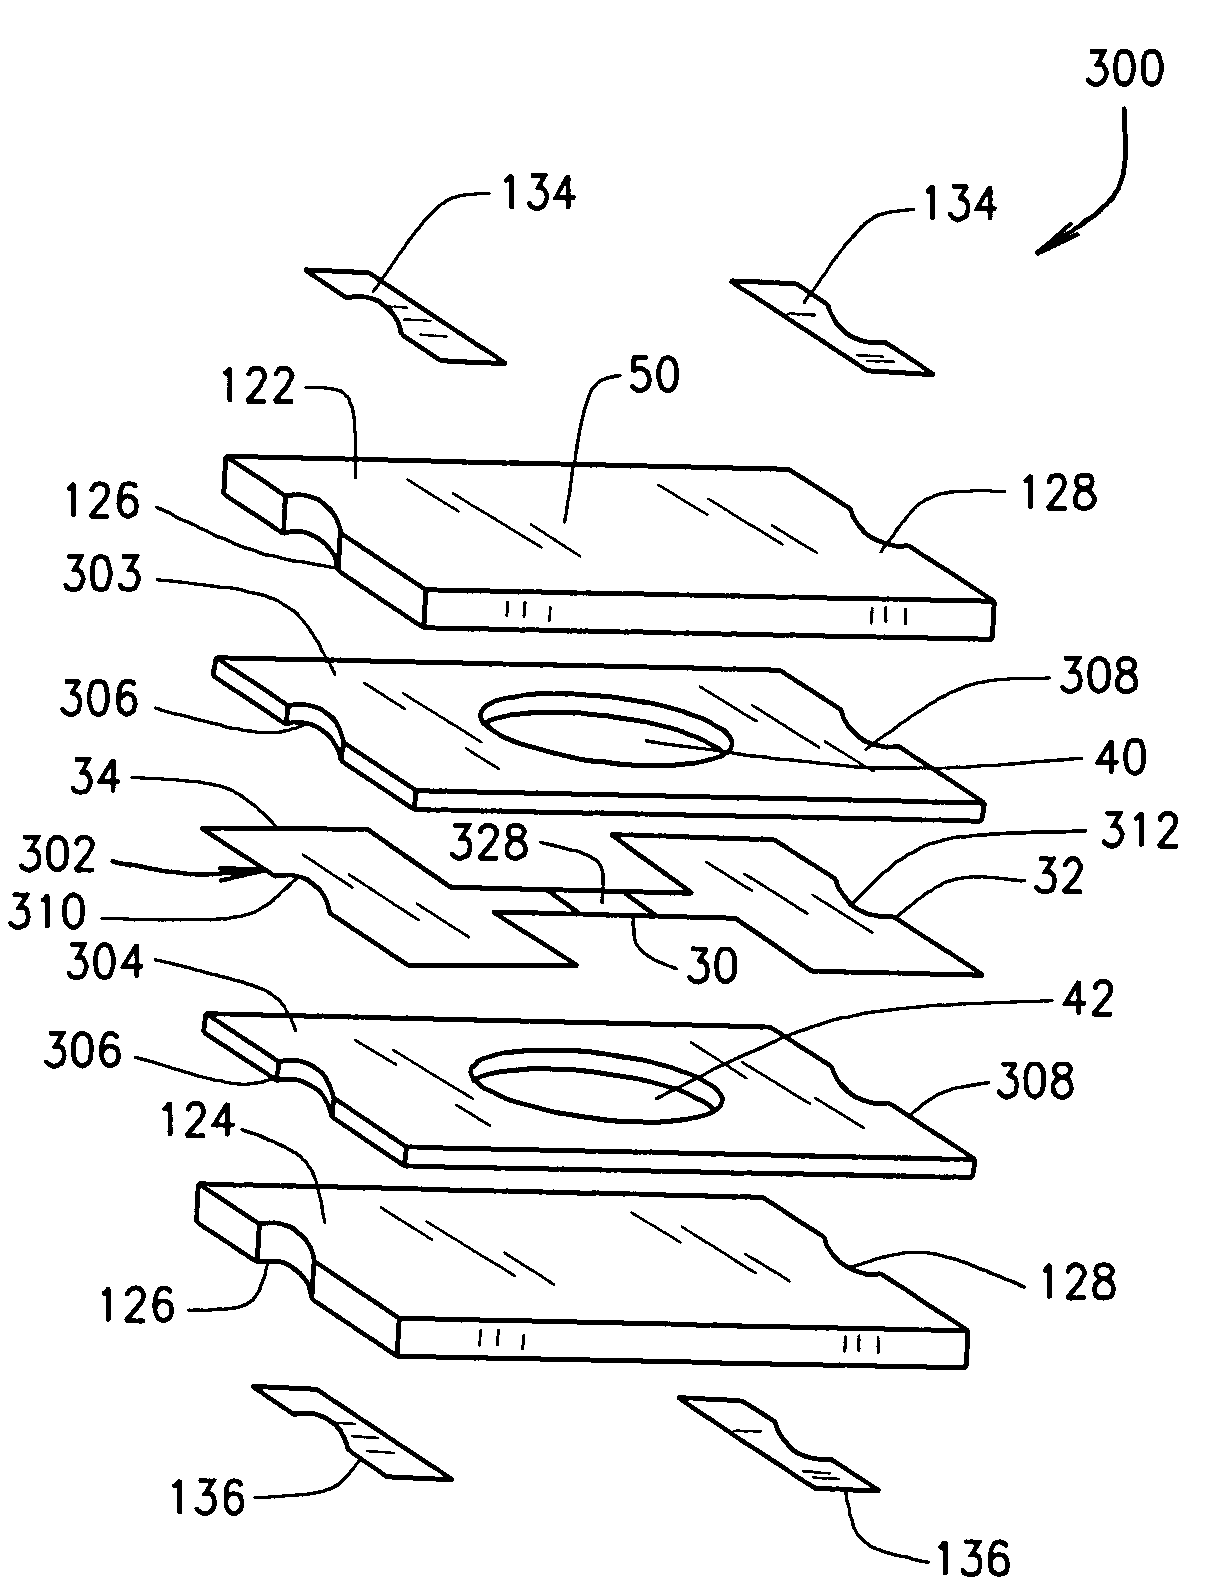 Low resistance polymer matrix fuse apparatus and method